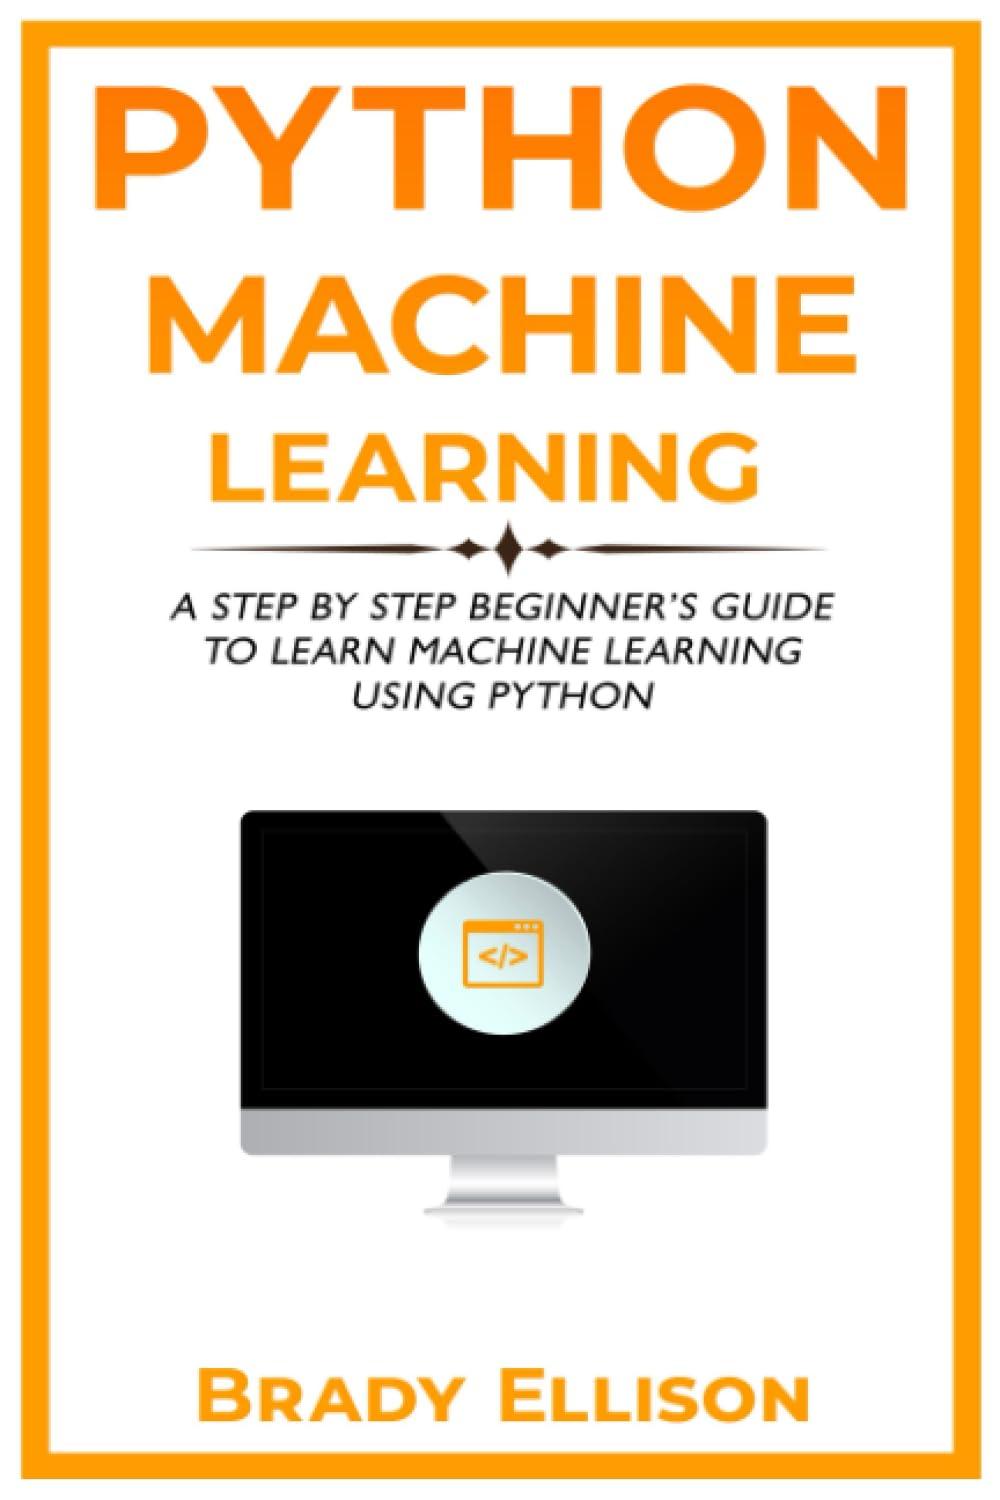 python machine learning a step by step beginner’s guide to learn machine learning using python 1st edition